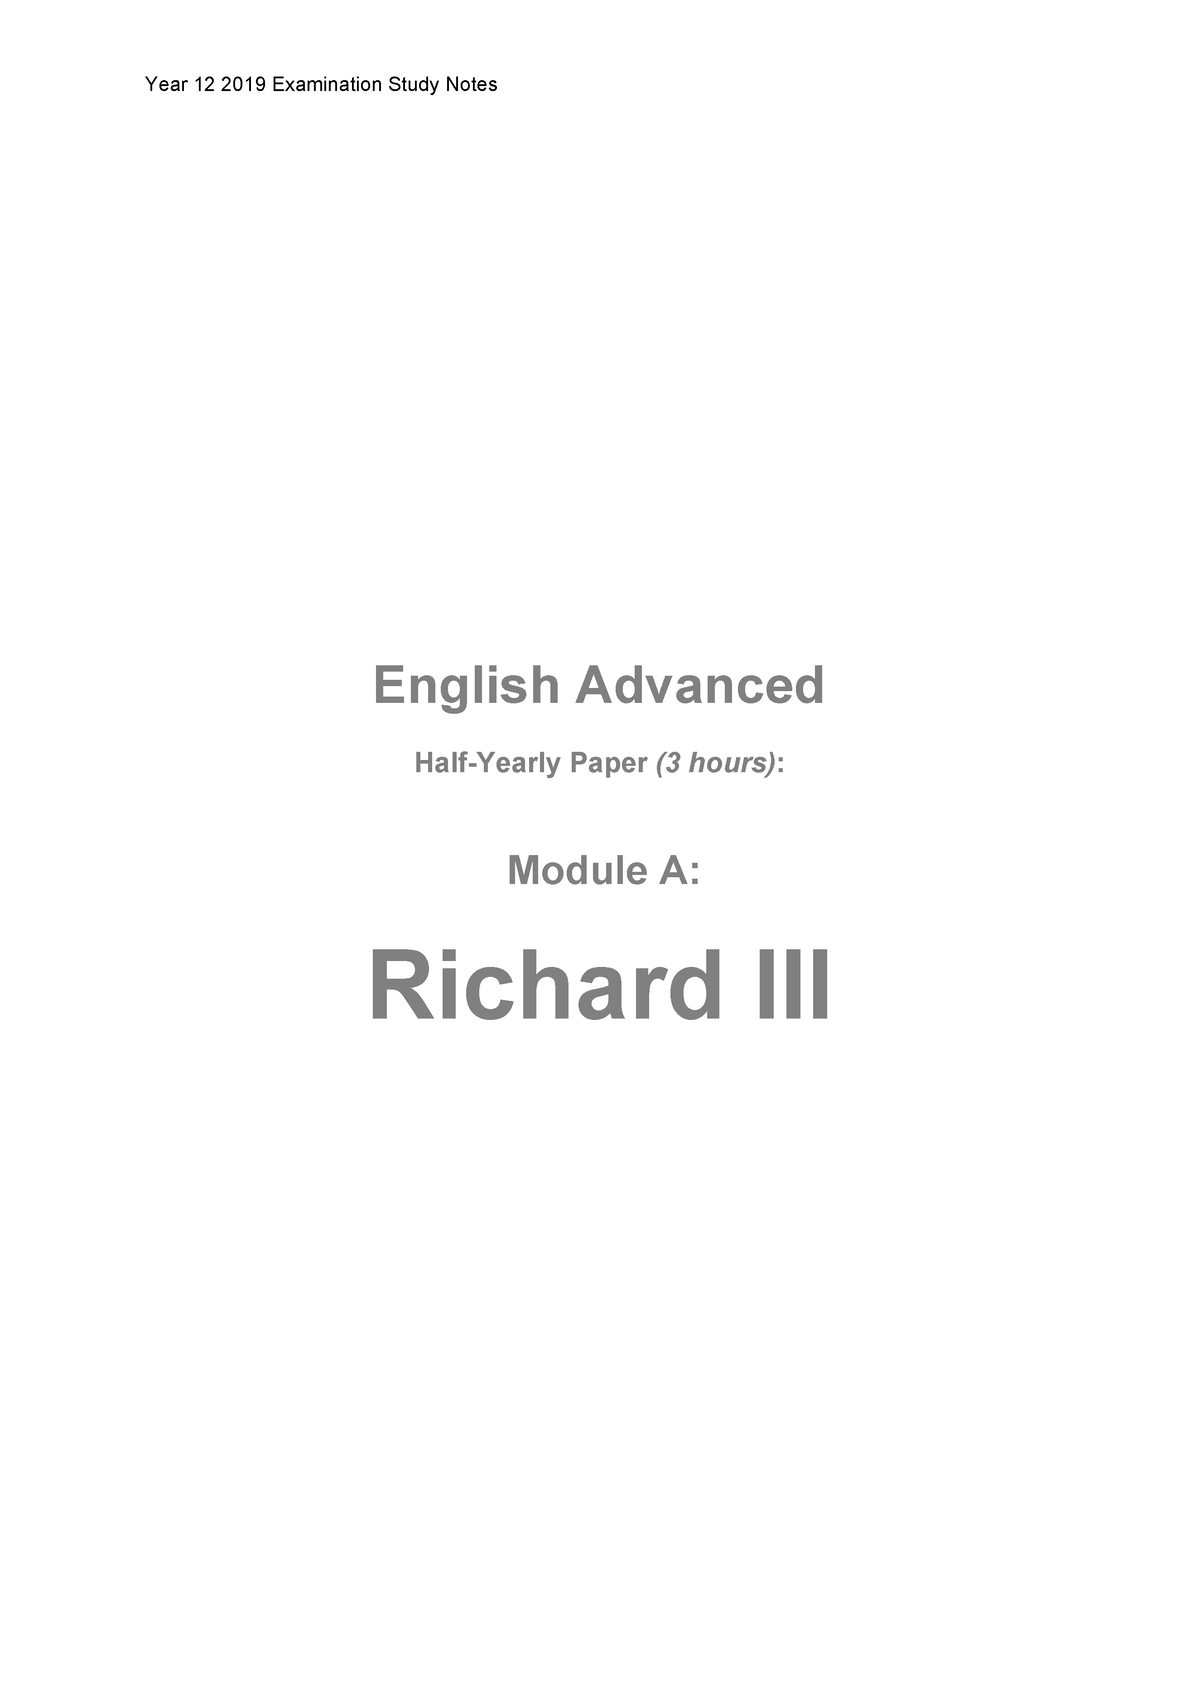 Textual Conversations Module A Richard III and Looking for Richard Study Notes